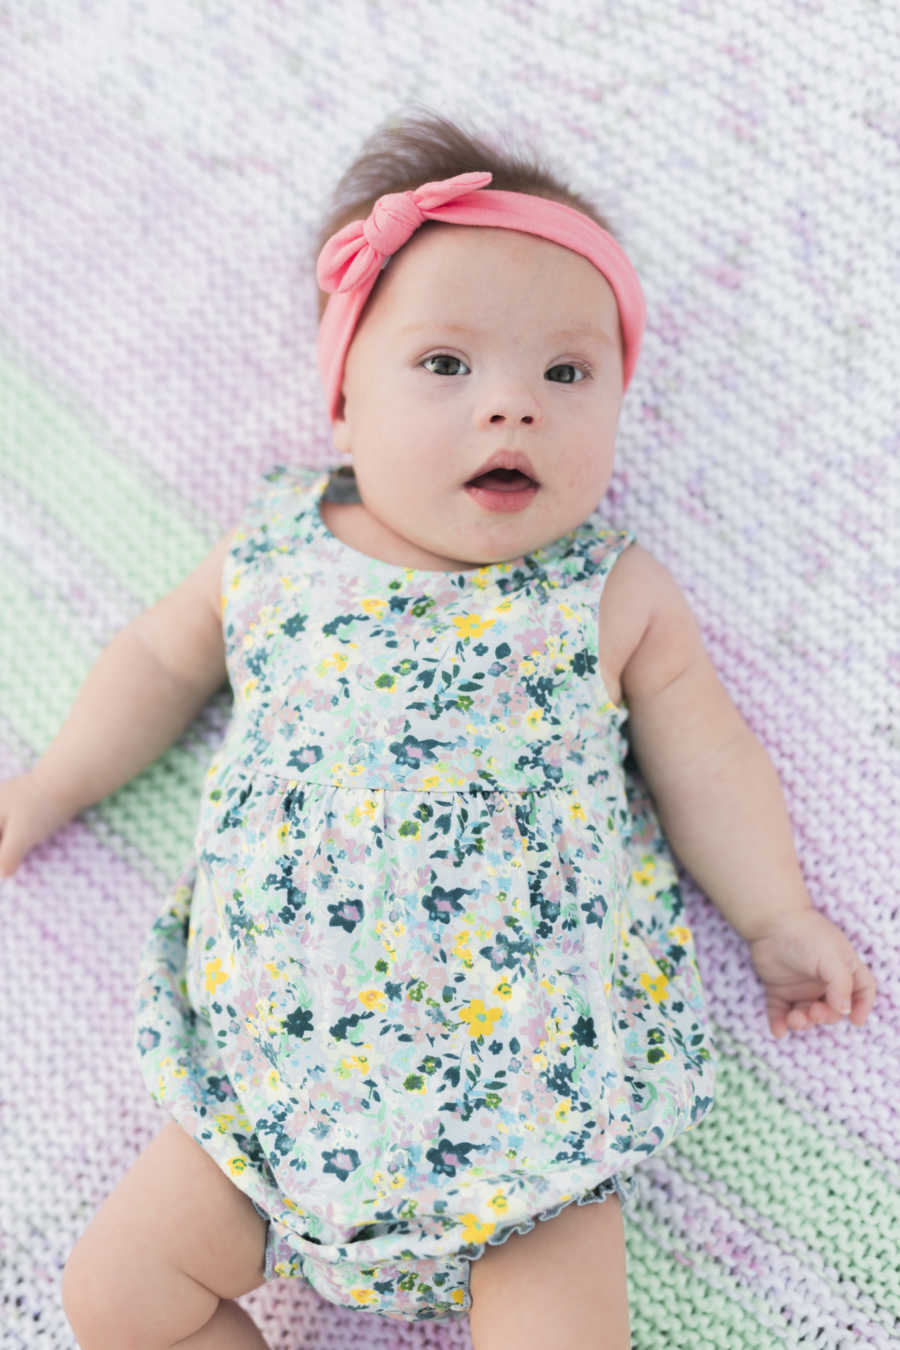 Baby with down syndrome and heart defect lays on back wearing pink head band and floral onesie